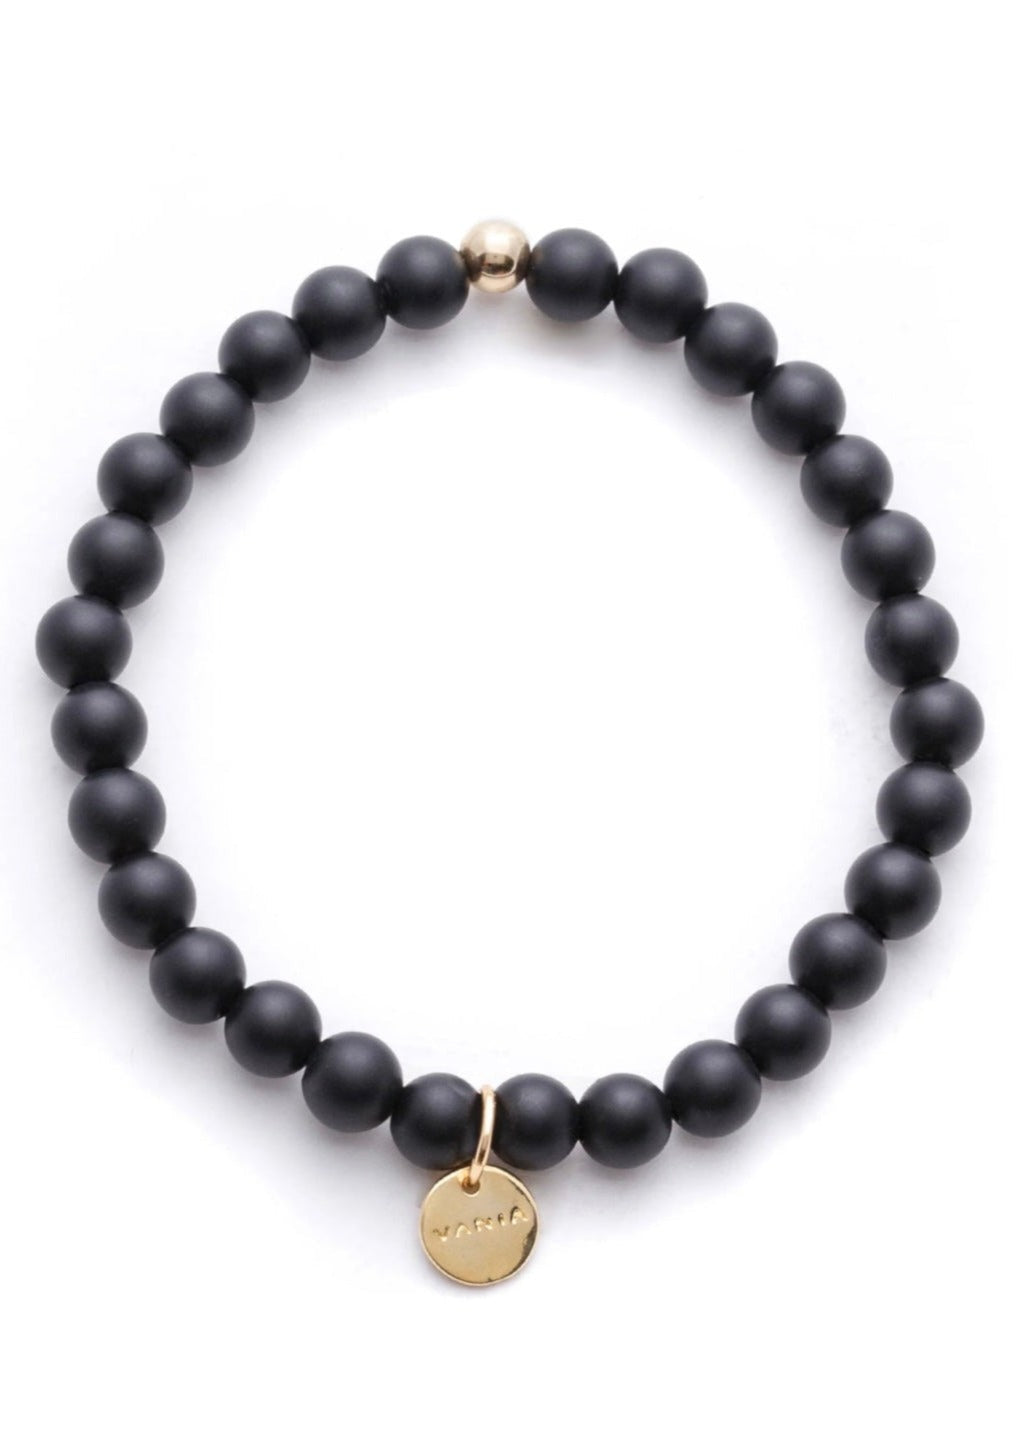 Mens Amuleto Onyx Bracelet, Gold Filled, by VANIA Attributed as a stone that assists with keeping bad vibes at bay, by wearing this bracelet be reminded of the importance of knowing yourself on your own terms and protecting your boundaries. Love, safety and security are gifts we give ourselves, be reminded that alone time promotes stillness which promotes clarity to be accountable as the owner and master of your destiny and path.